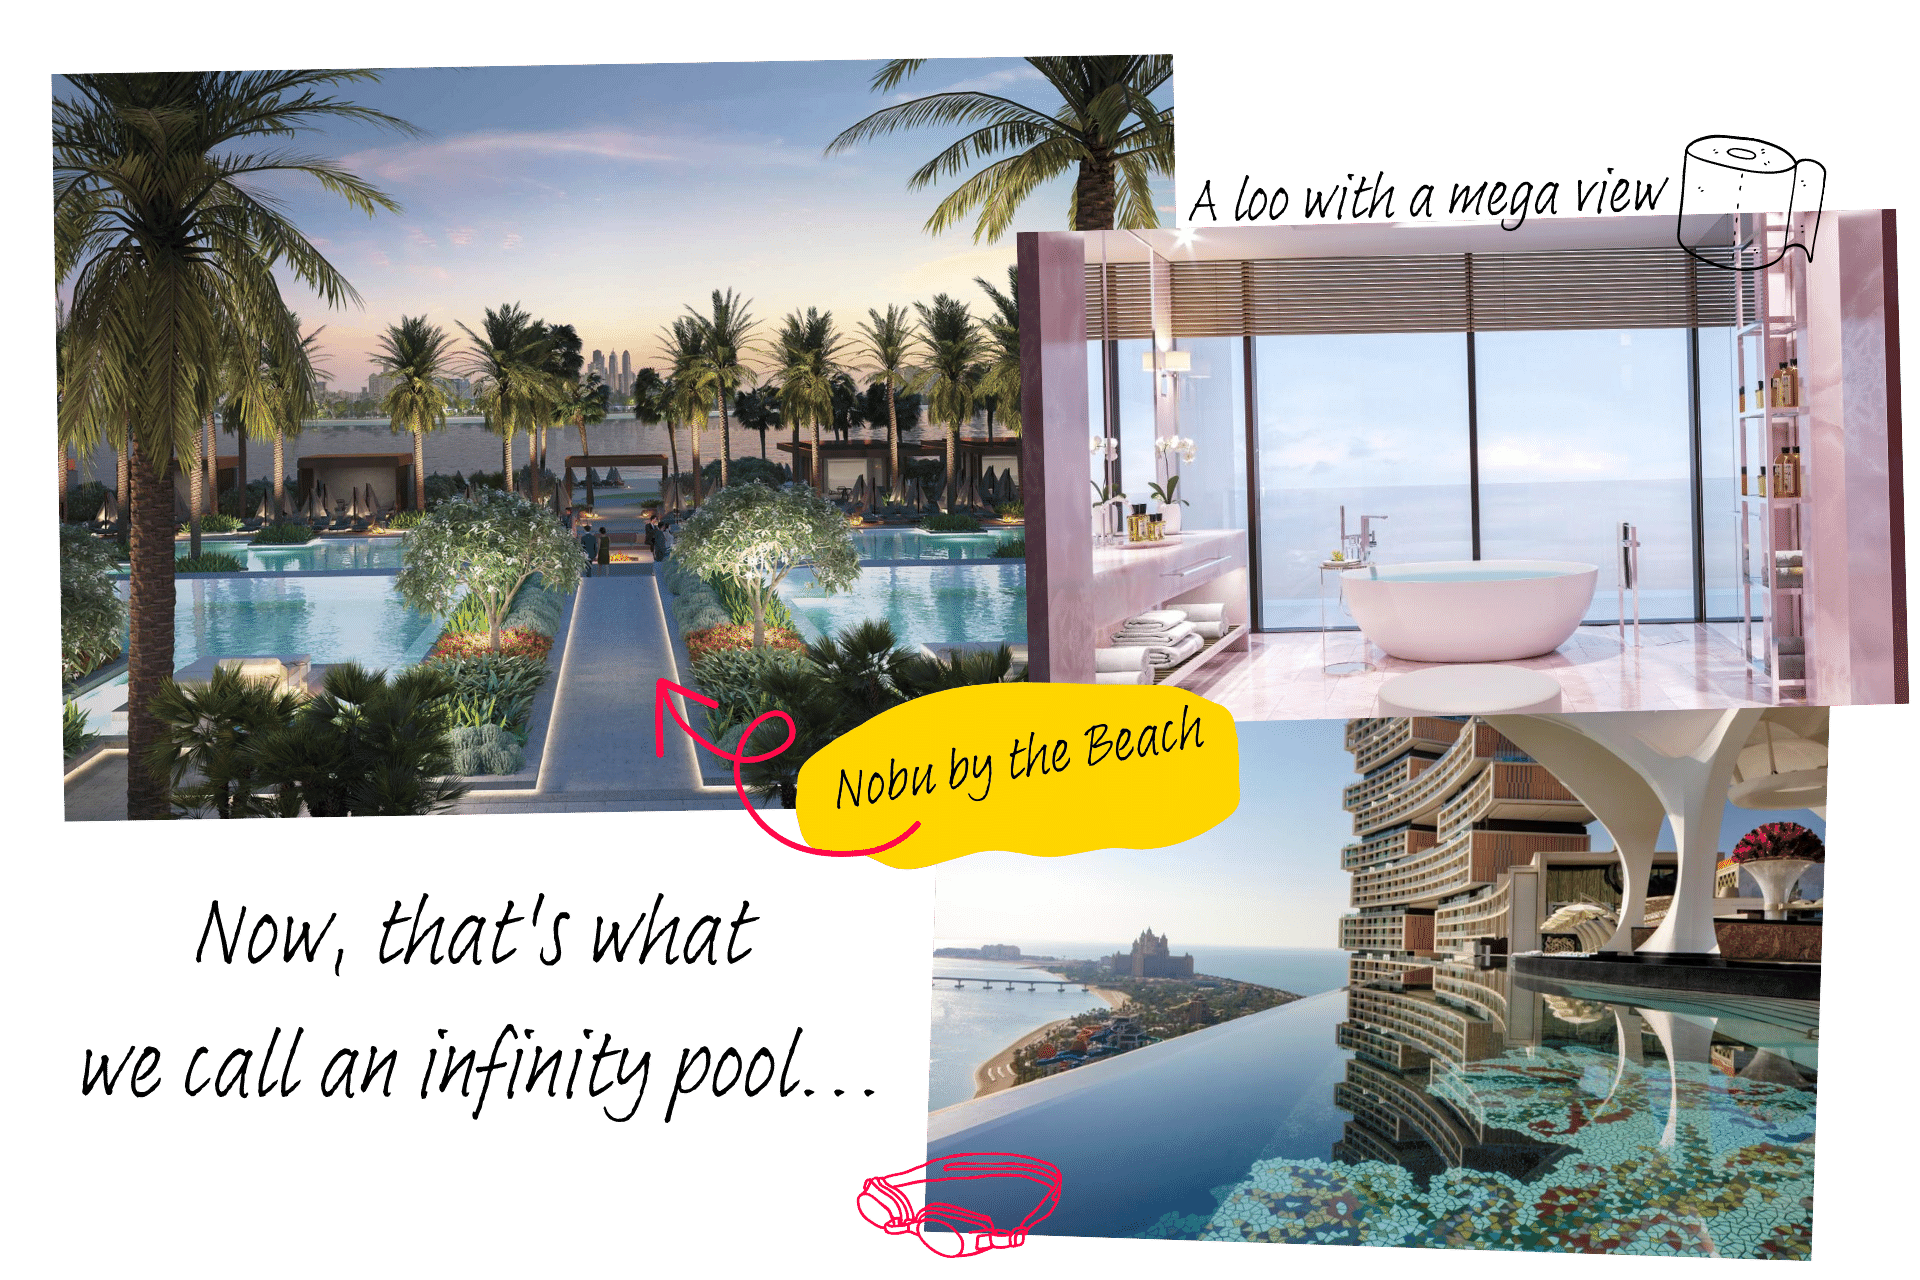 A collage of images from Atlantis the Royal, a luxury hotel in Dubai, show a poolside restaurant lined with palm trees, a bathroom with a standalone tub and a sea view, and an infinity pool.